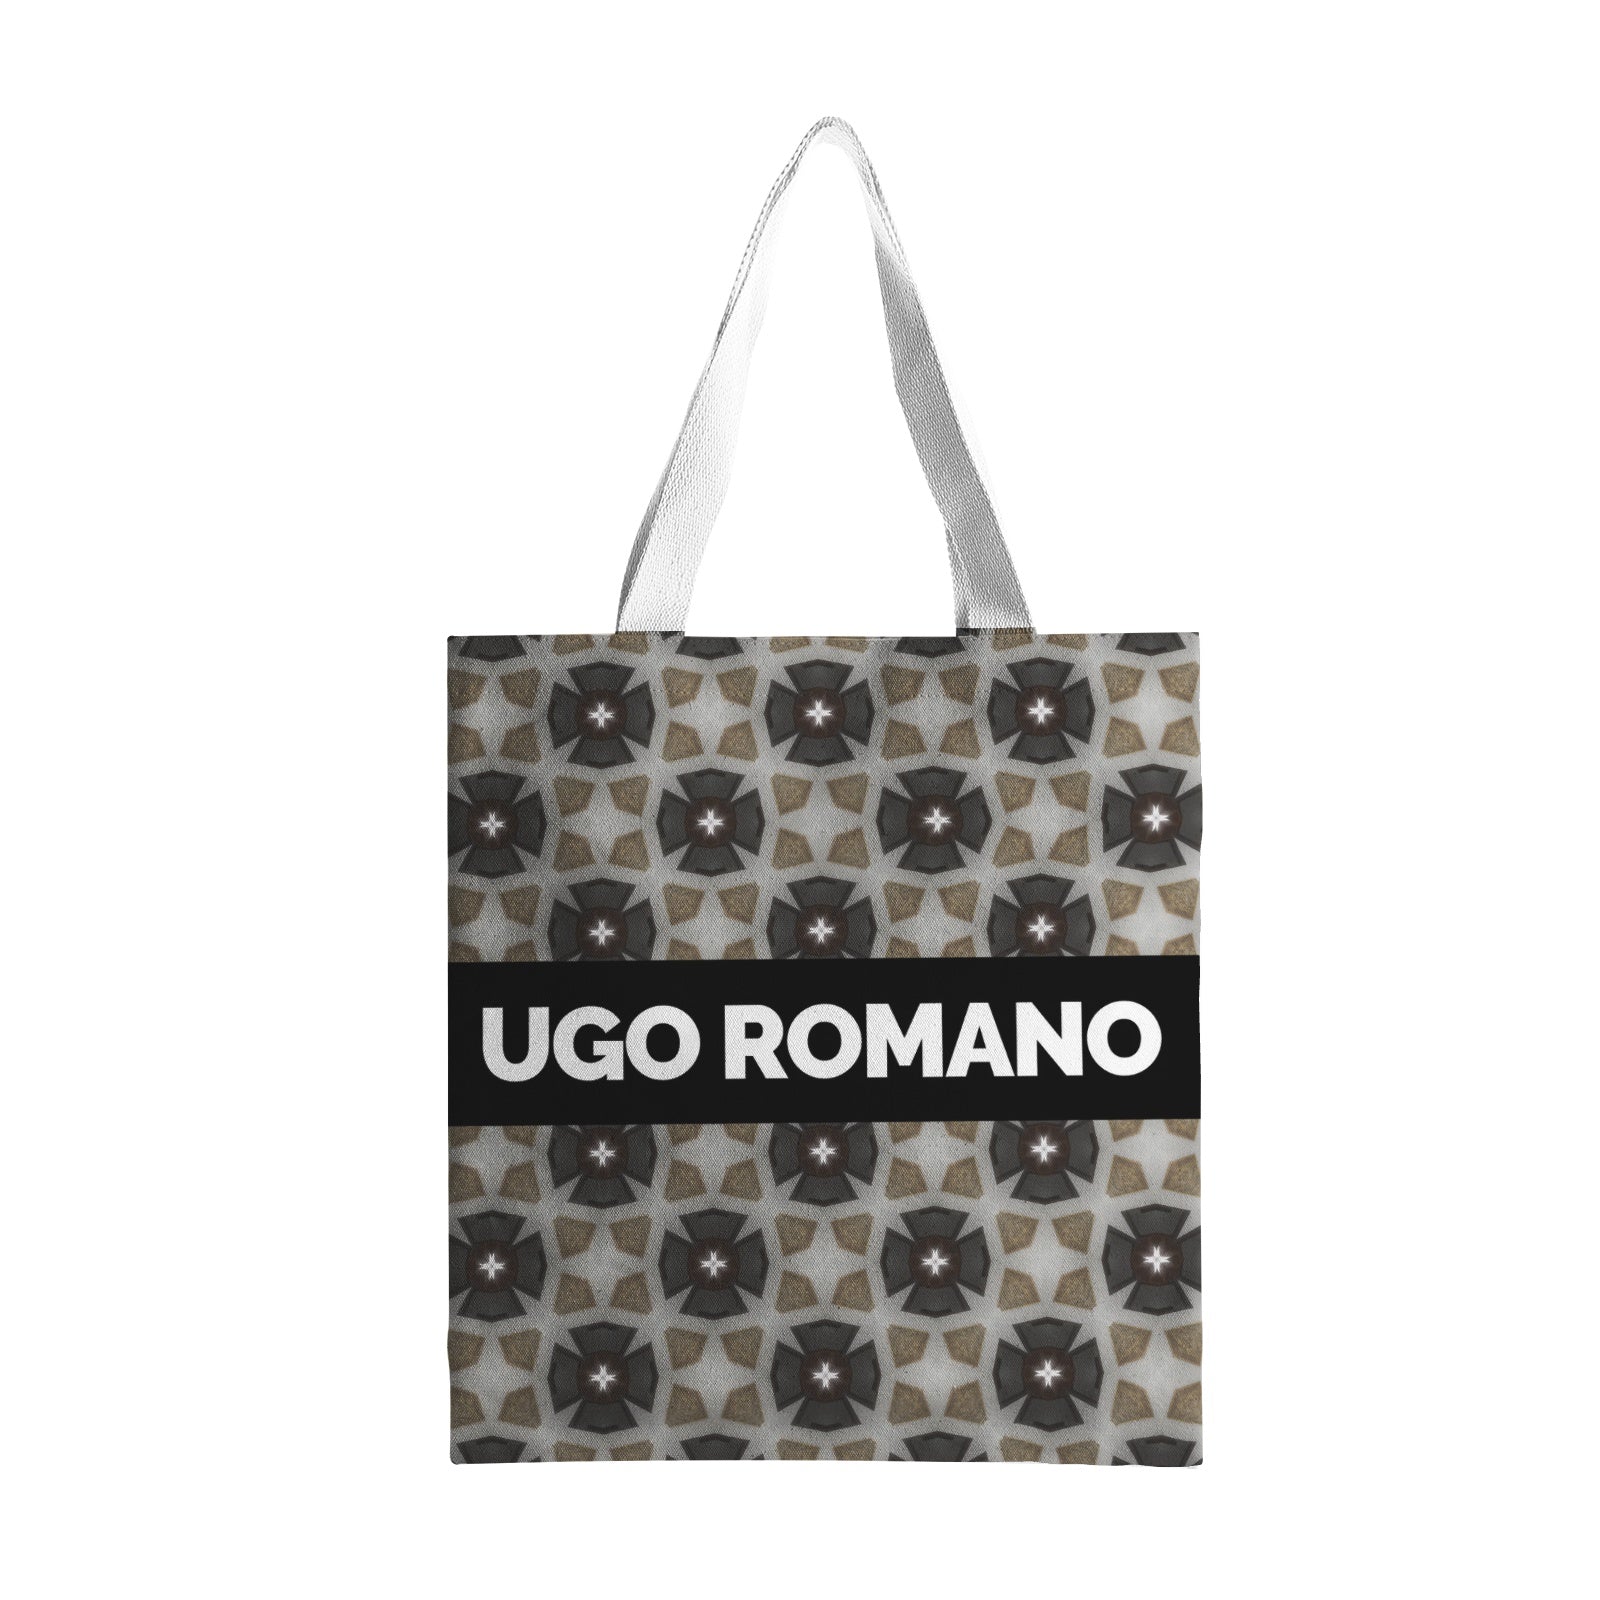 Heavy Duty and Strong Natural Cotton Canvas Tote Bag - UGO ROMANO URTB041